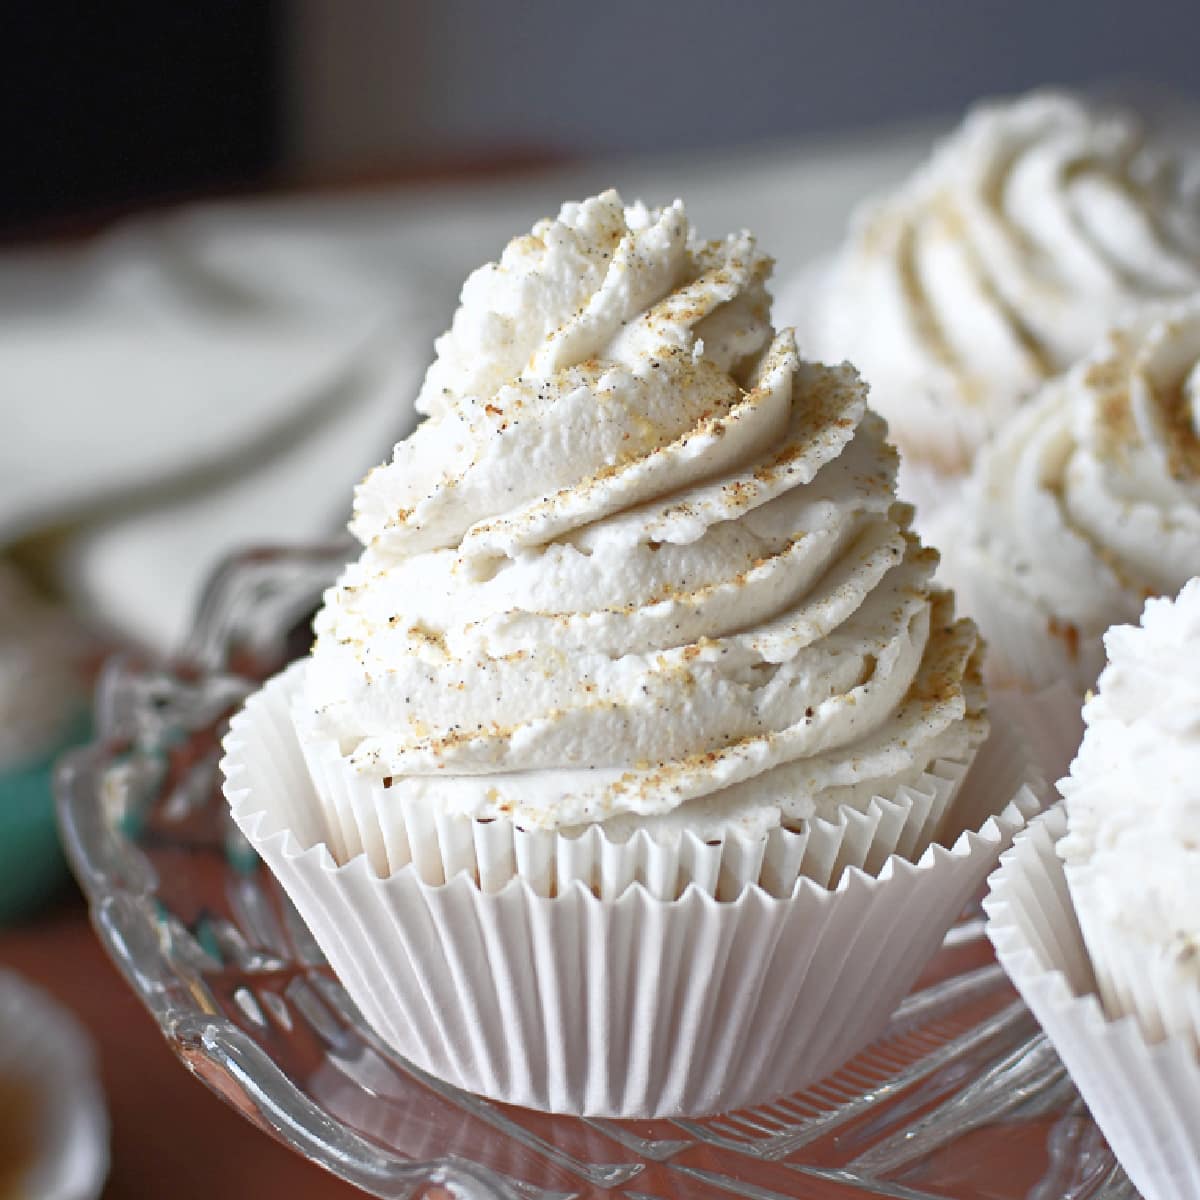 A healthy banana cupcake topped with coconut whipped cream.